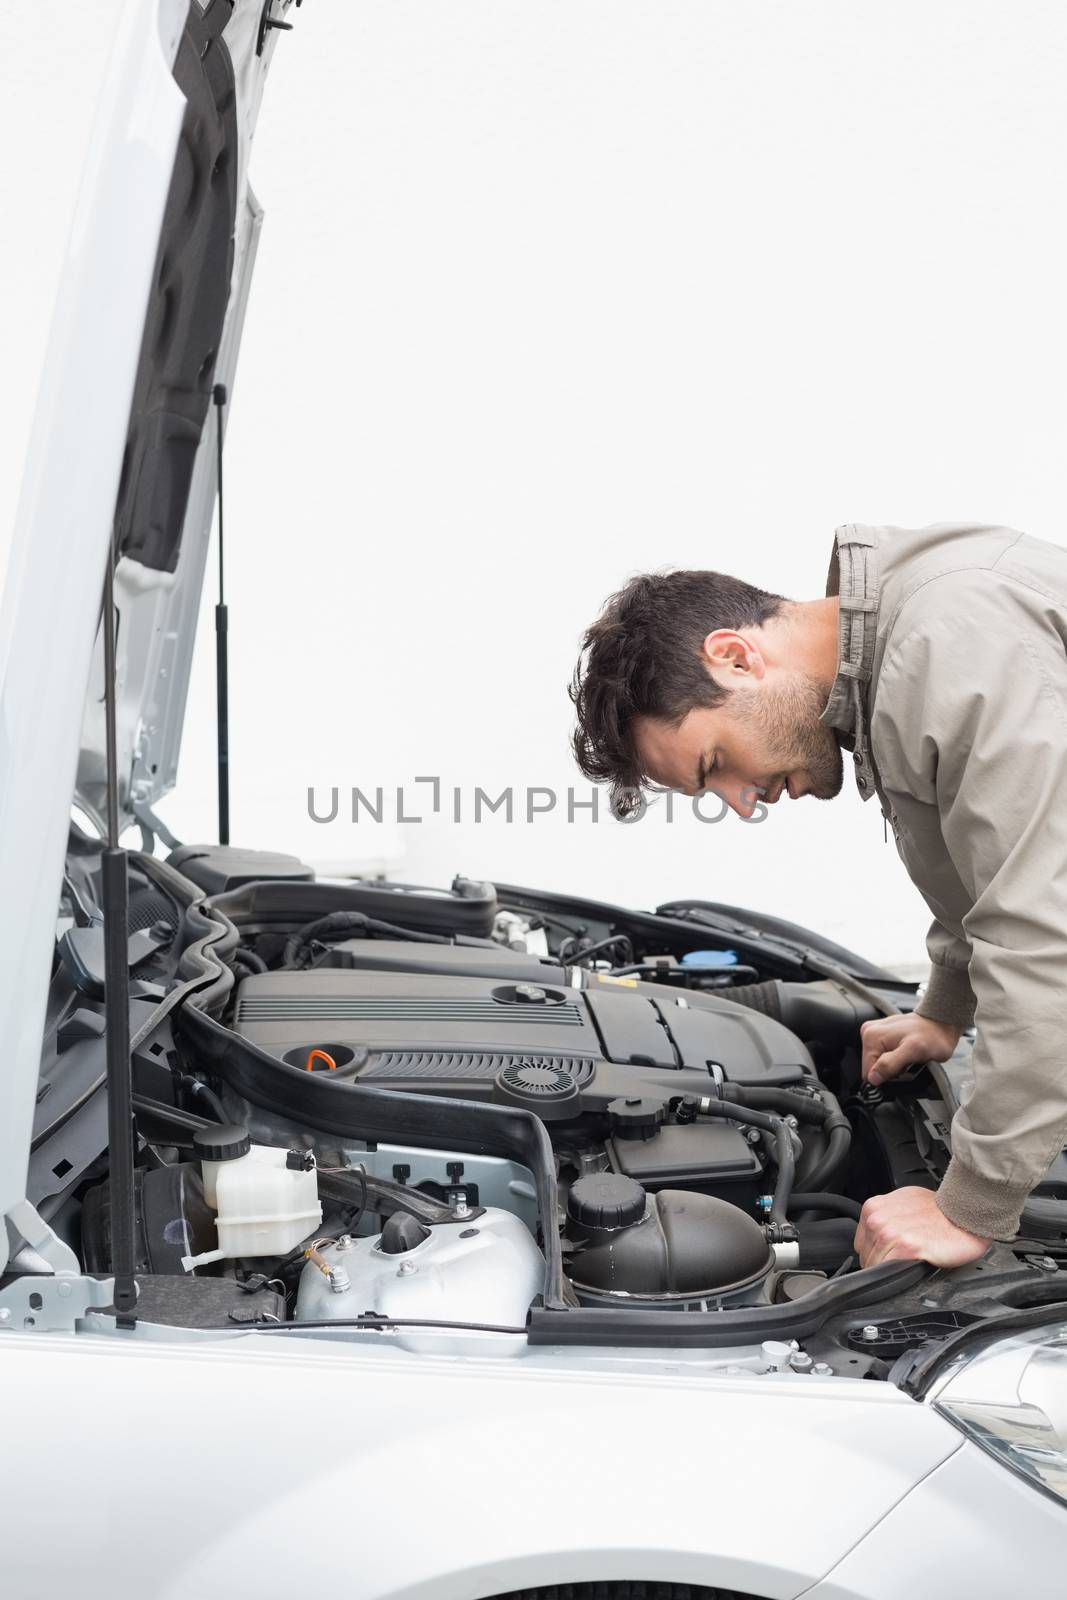 Stressed man looking at engine of his car